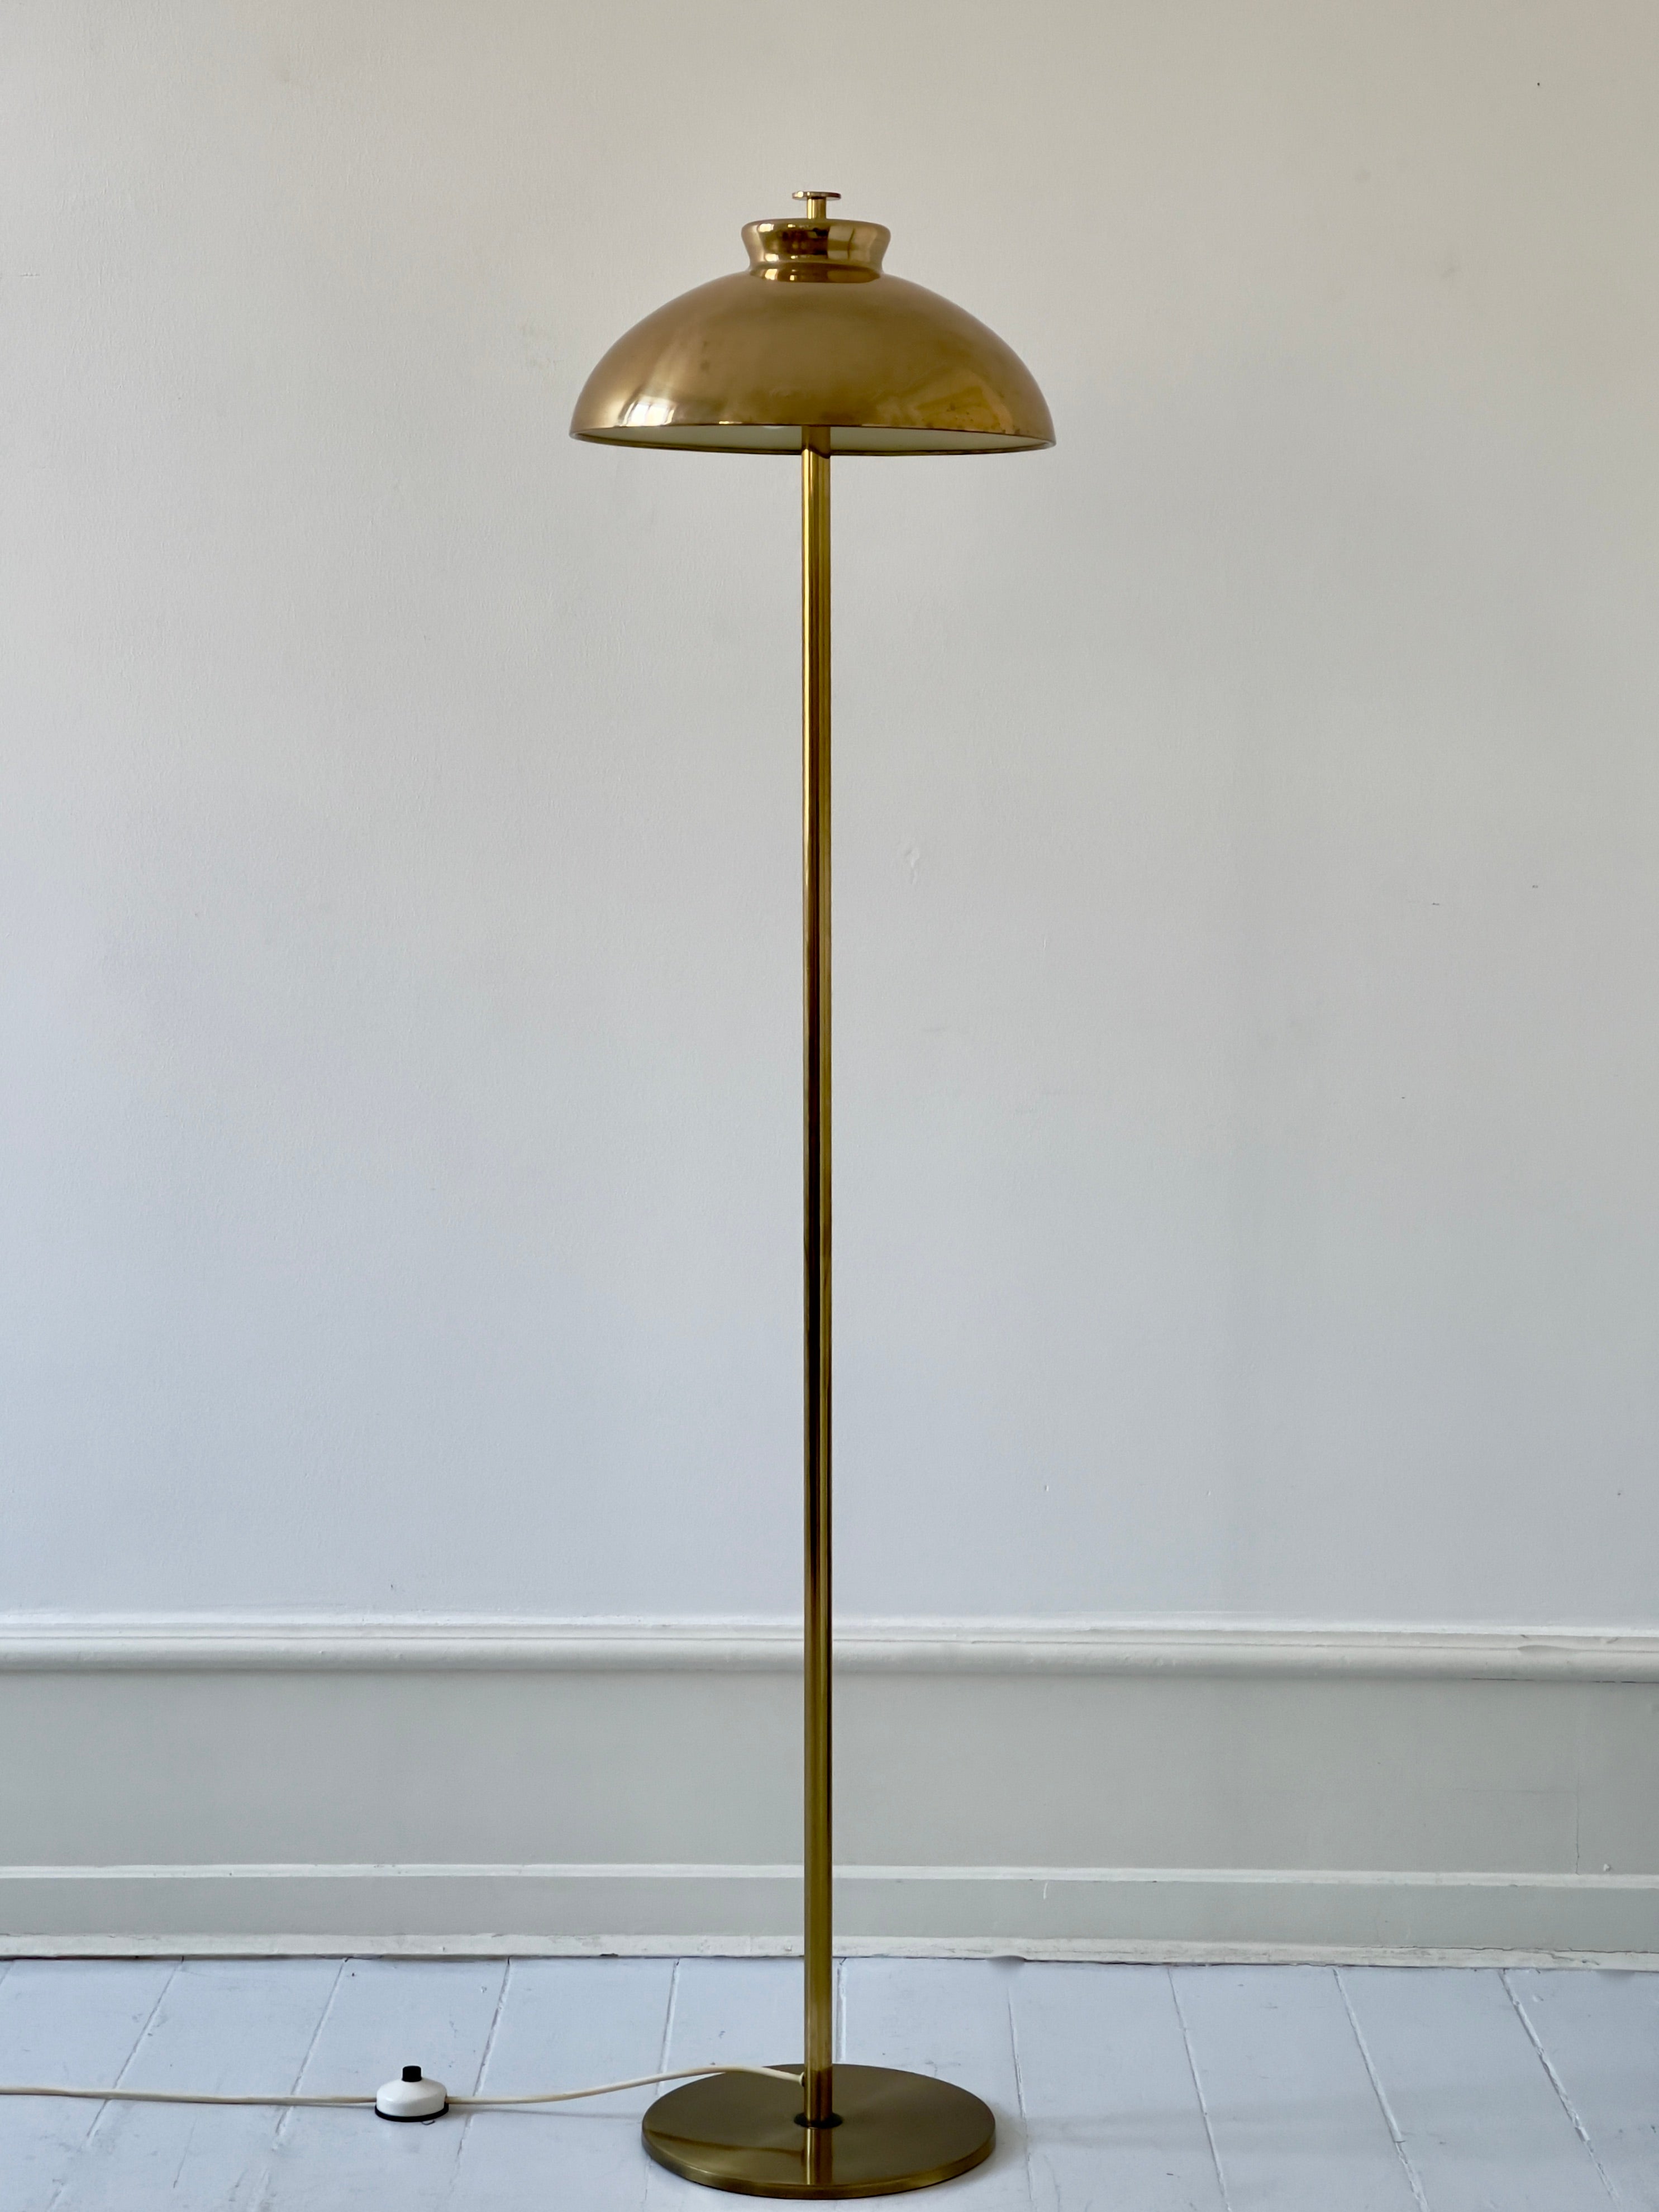 An original 1960s Scandinavian floor lamp in resplendent brass, adorned with a beautiful, elegant patina. In its form and finish, this lamp echoes the distinctive style reminiscent of Paavo Tynell, the visionary luminary from Finland.

The 1960s